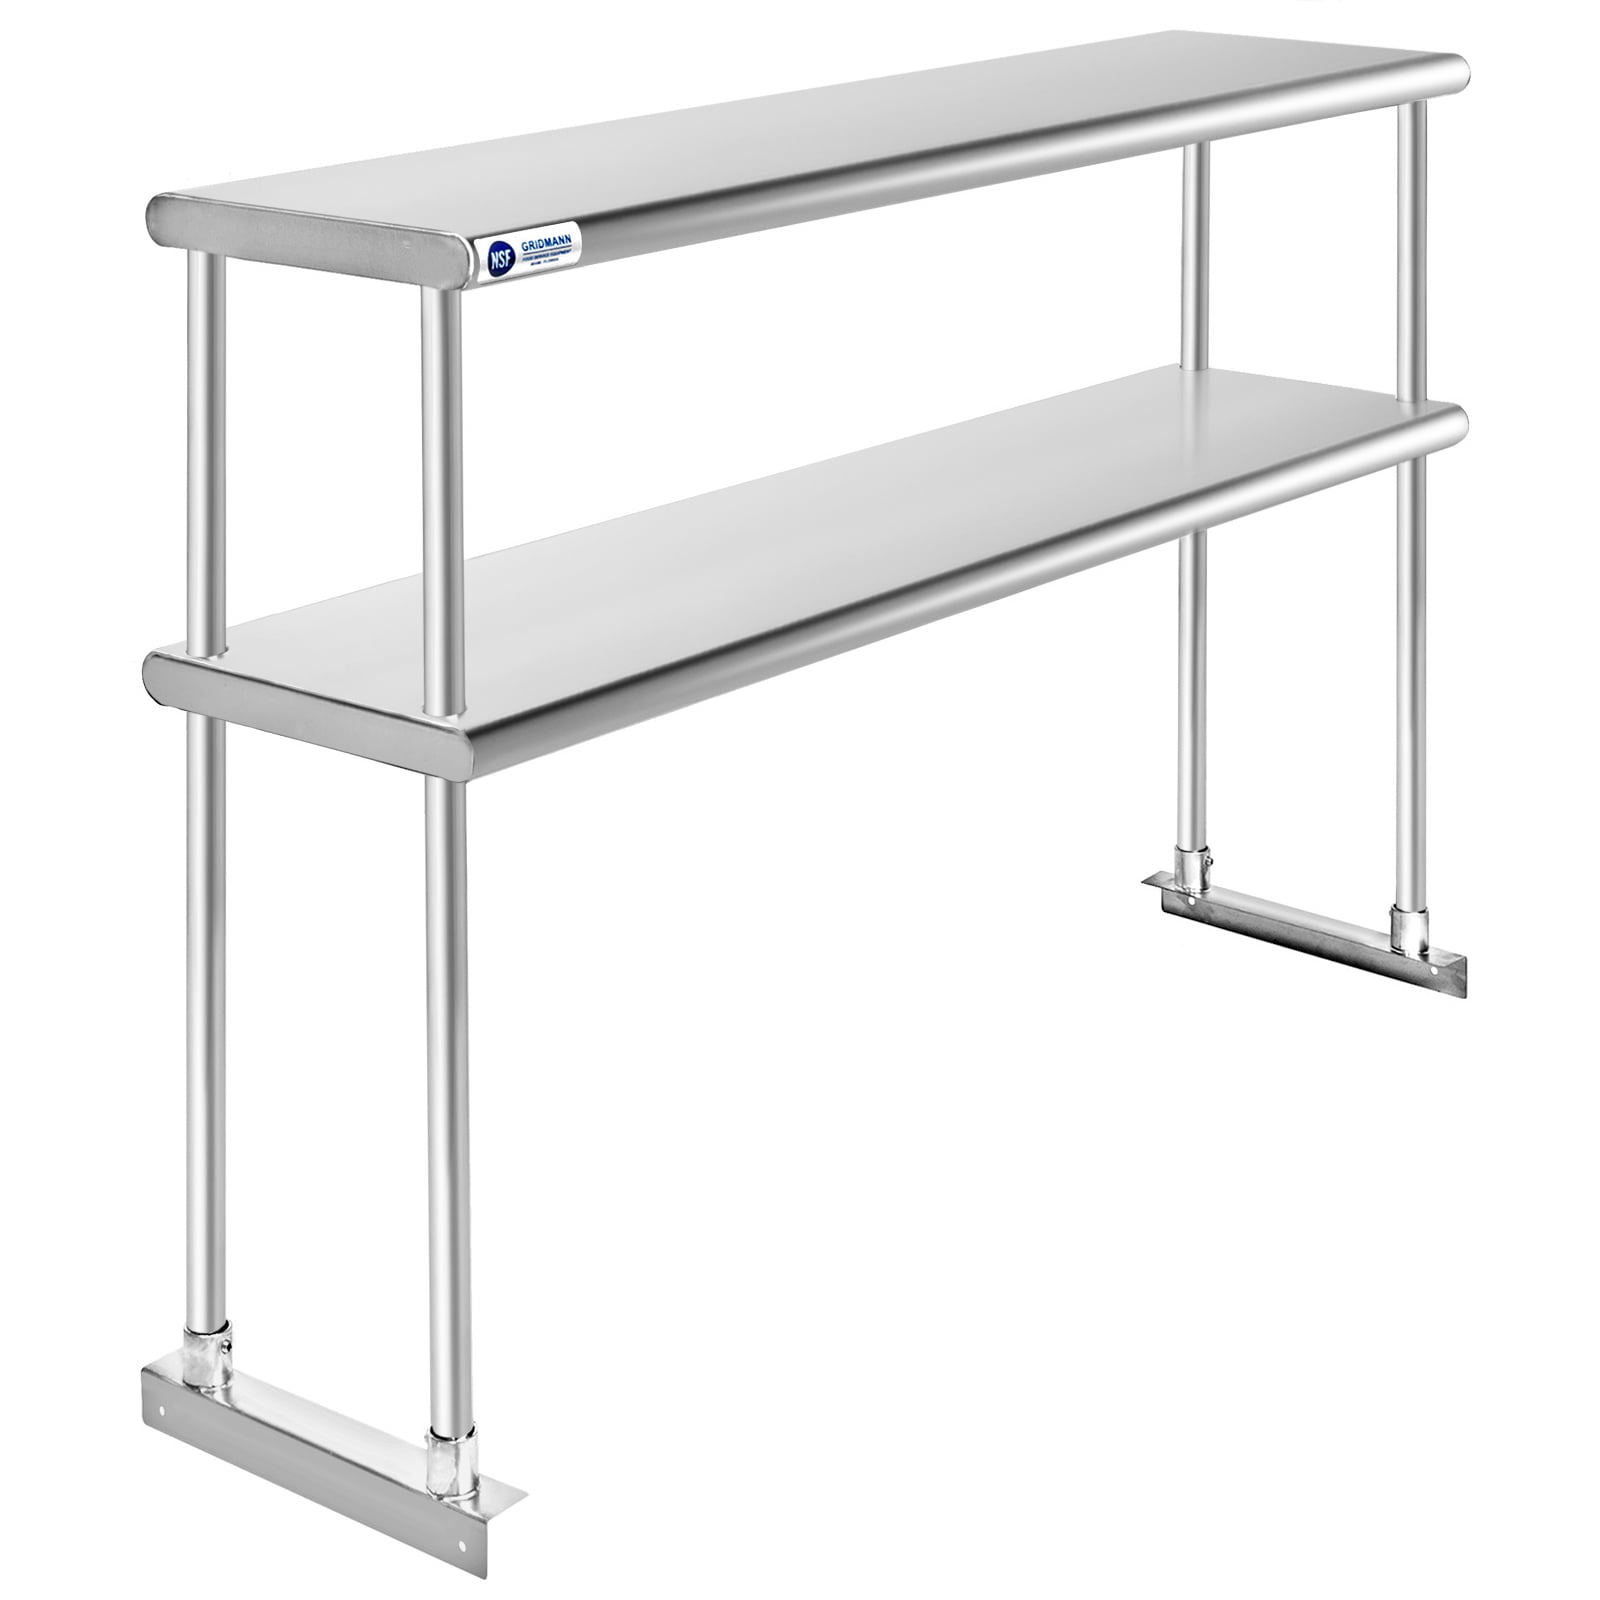 Stainless 12" x 60" Steel Work Table Commercial Prep Double Deck Overshelf Shelf 